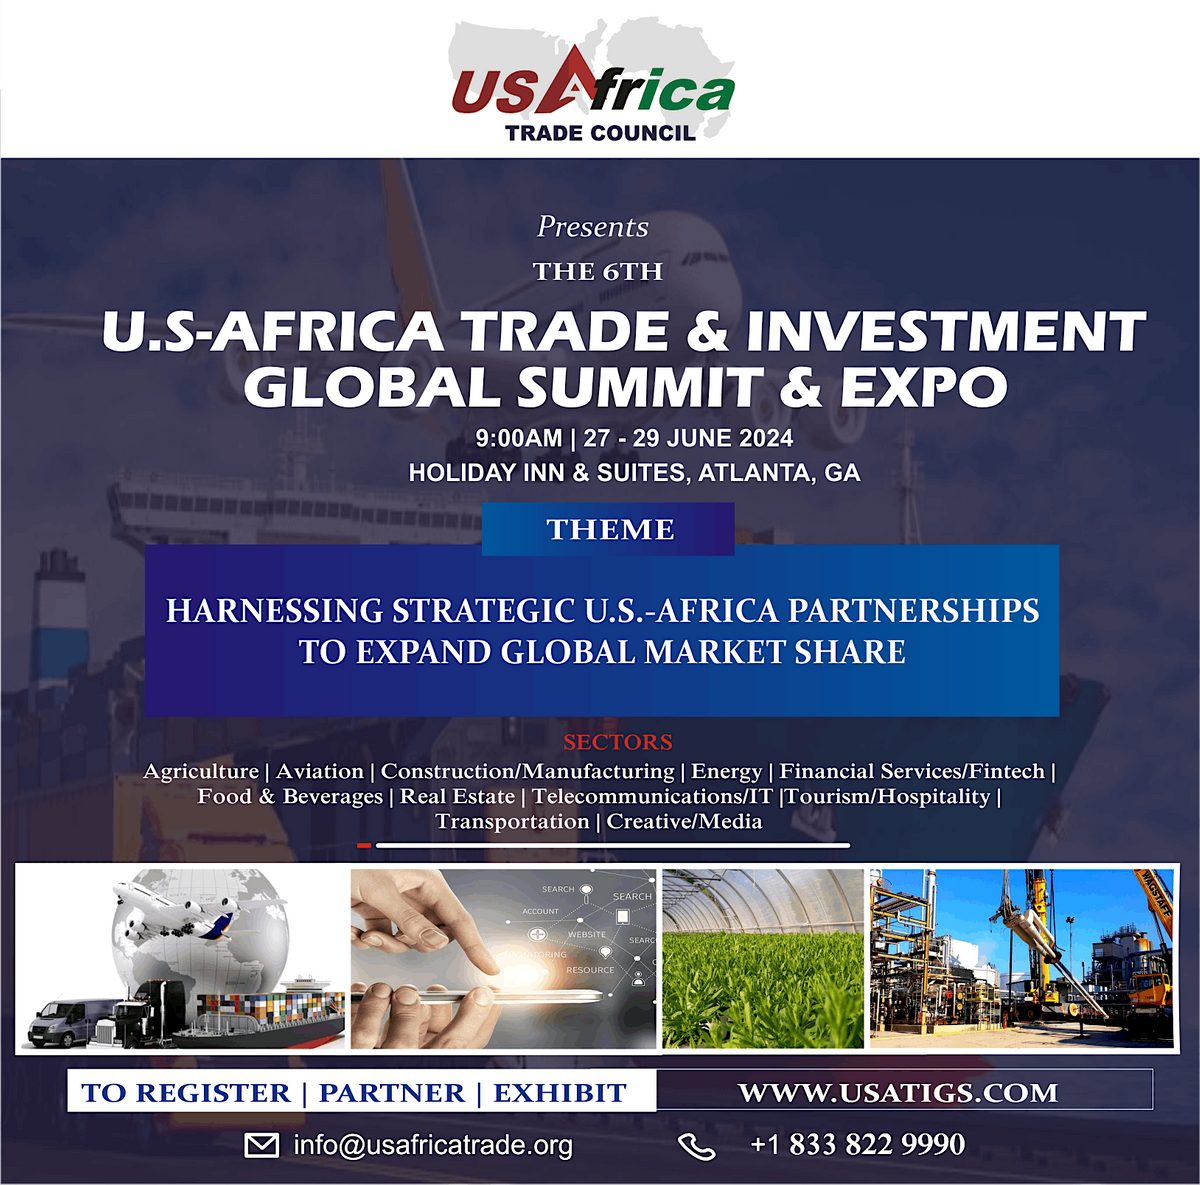 U.S.-Africa Trade and Investment Global Summit and Expo 2024